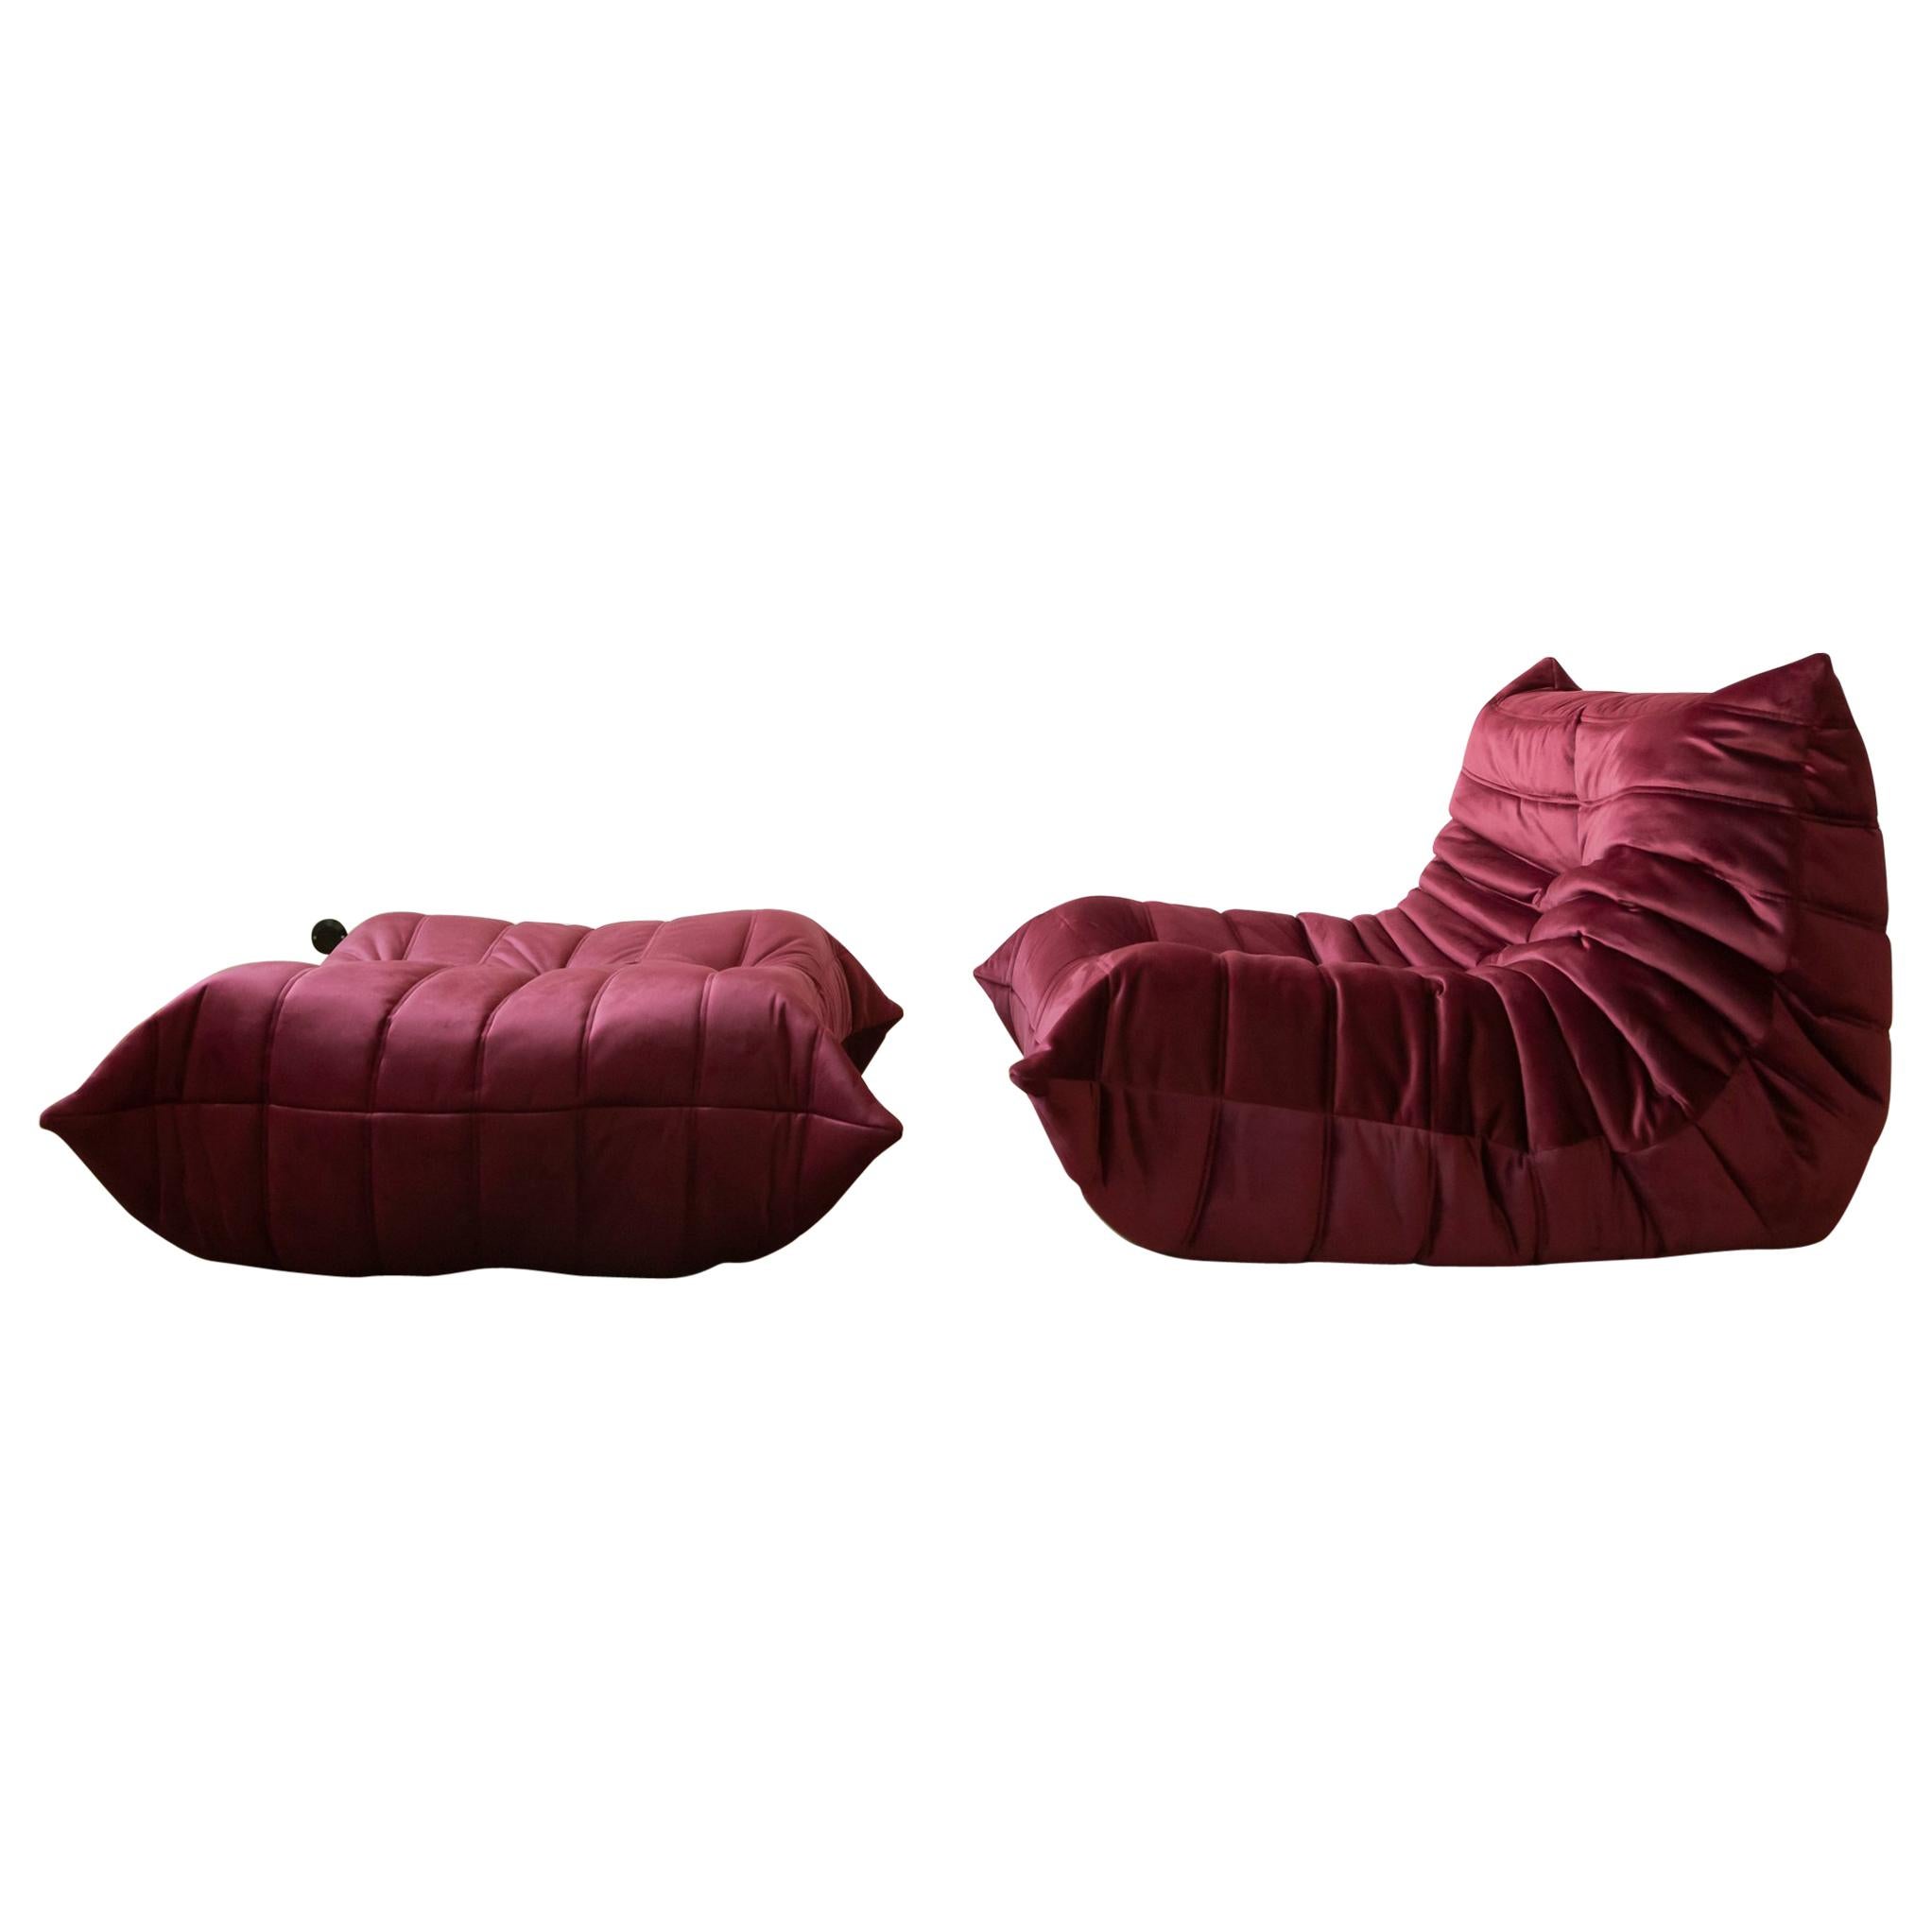 Two-Piece Togo Set by Michel Ducaroy Manufactured by Ligne Roset in France For Sale